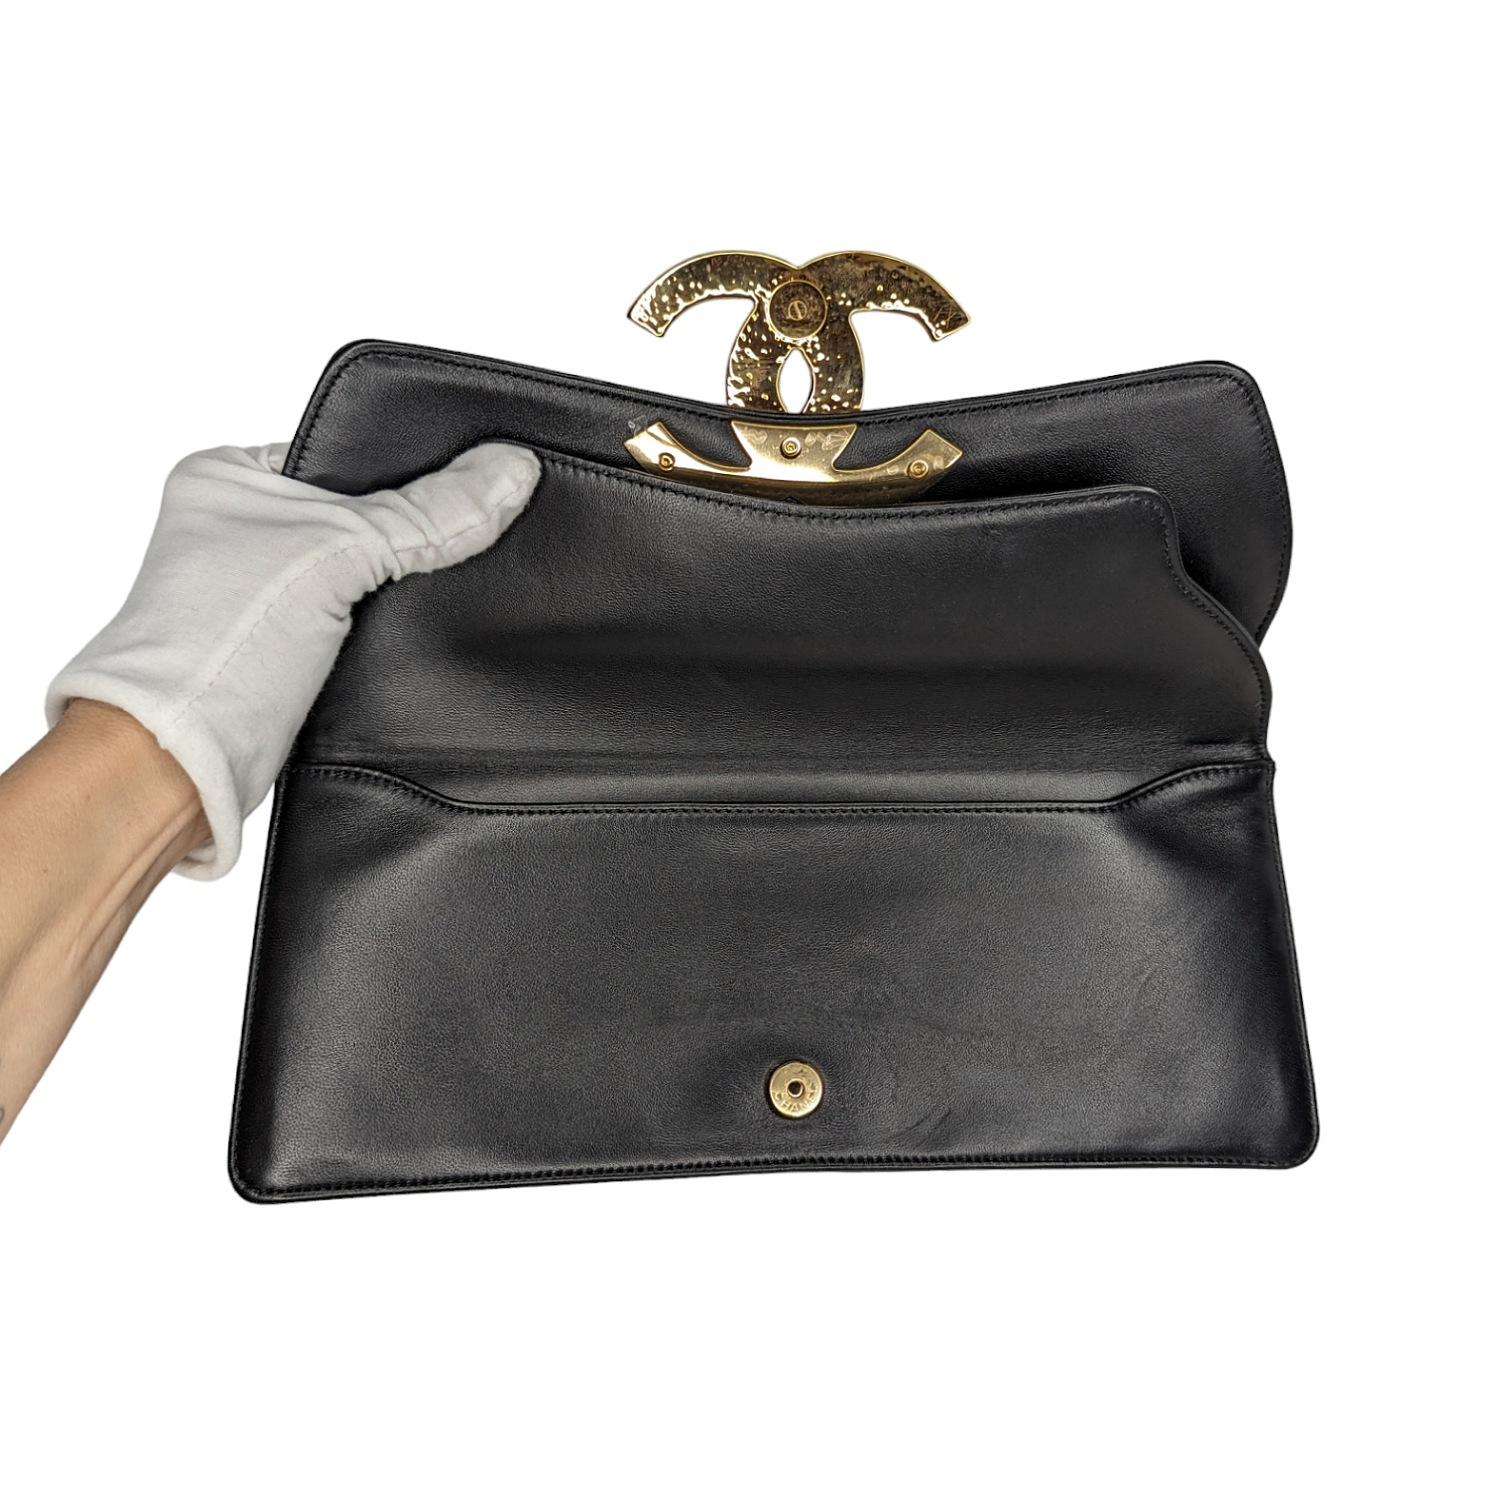 Chanel Black Lambskin Ancient Egypt Inspired Clutch 3